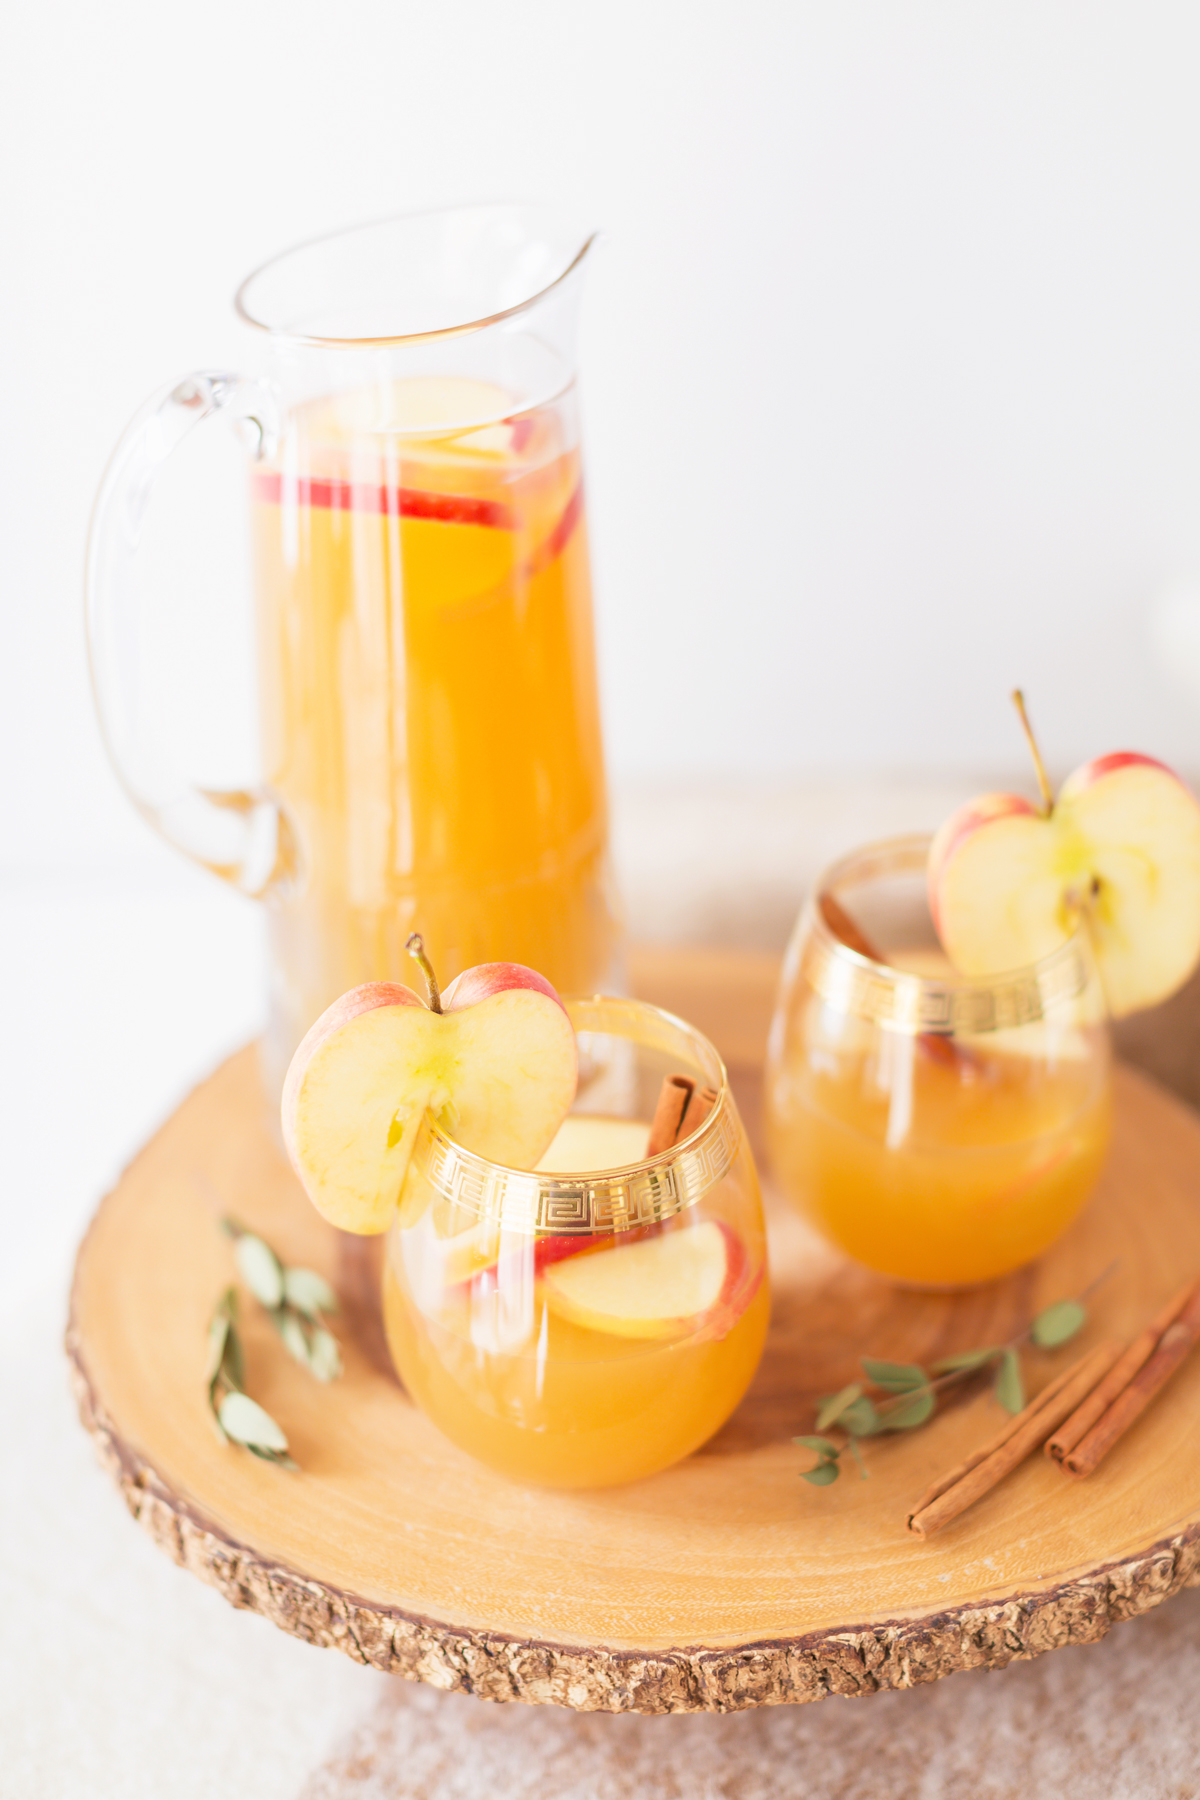 5 Cozy Fall Cocktail and Sangria Recipes | JustineCelina’s Best Fall Cocktail and Sangria Recipes | Late Harvest Spiced Apple Sangria | Featuring Eau Claire Distillery’s Apple Brandy | The Best Thanksgiving Sangria Recipe | The Best Apple Sangria Recipes | The Best Fall Sangria Recipe | No Added Sugar Sangria | Apple Cider Sangria | Easy Fall Sangria | Calgary Cocktail Photographer and Stylist | Calgary Lifestyle Blogger // JustineCelina.com